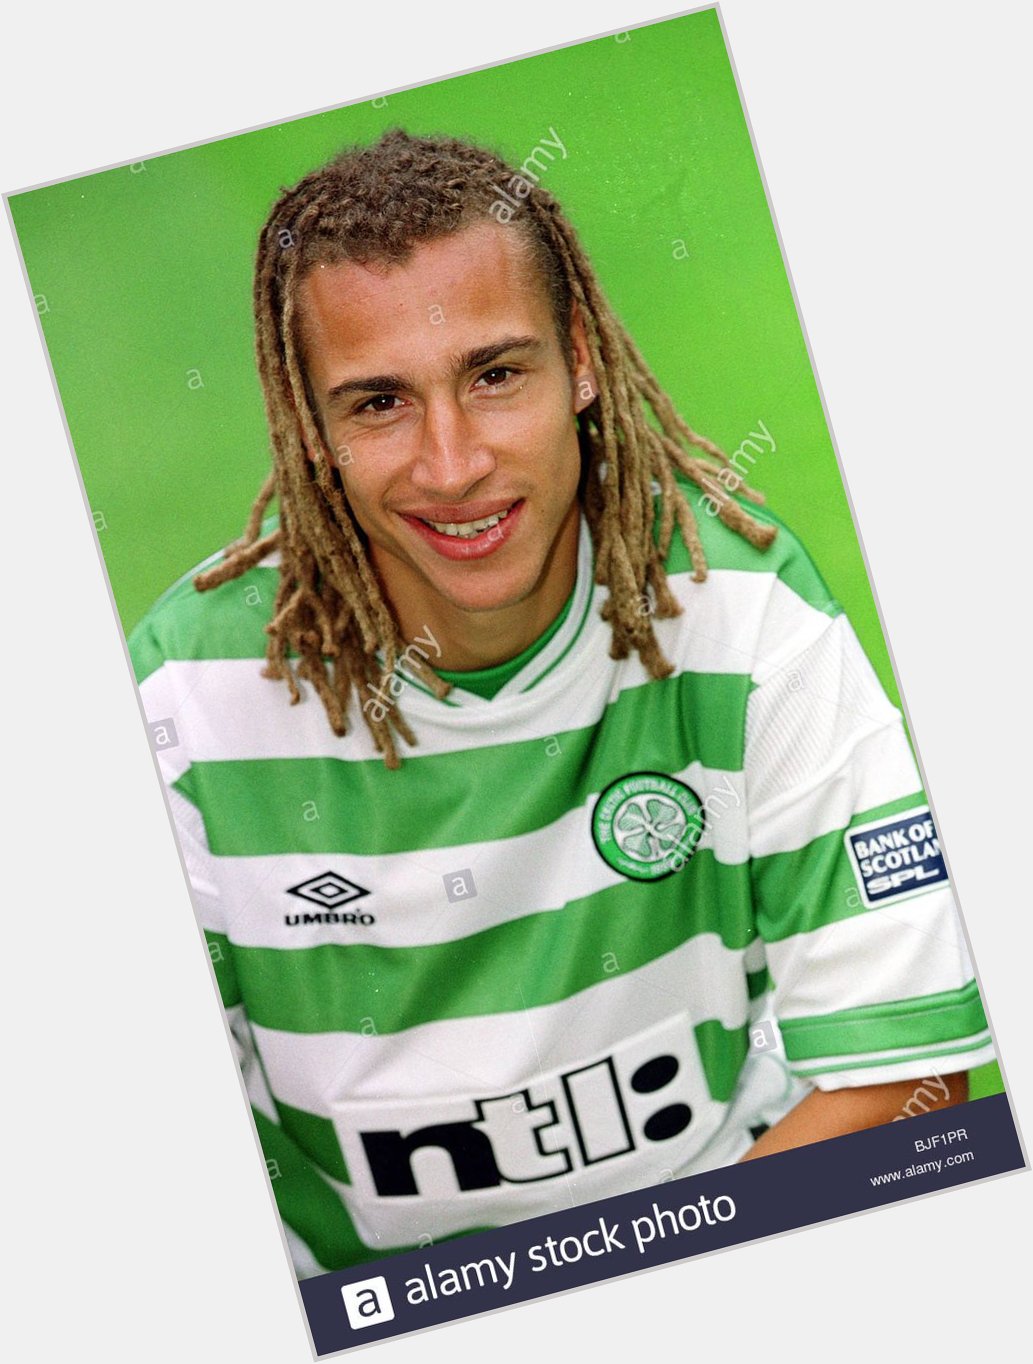 Happy birthday to the king of kings Henrik Larsson, absolute baller HH   